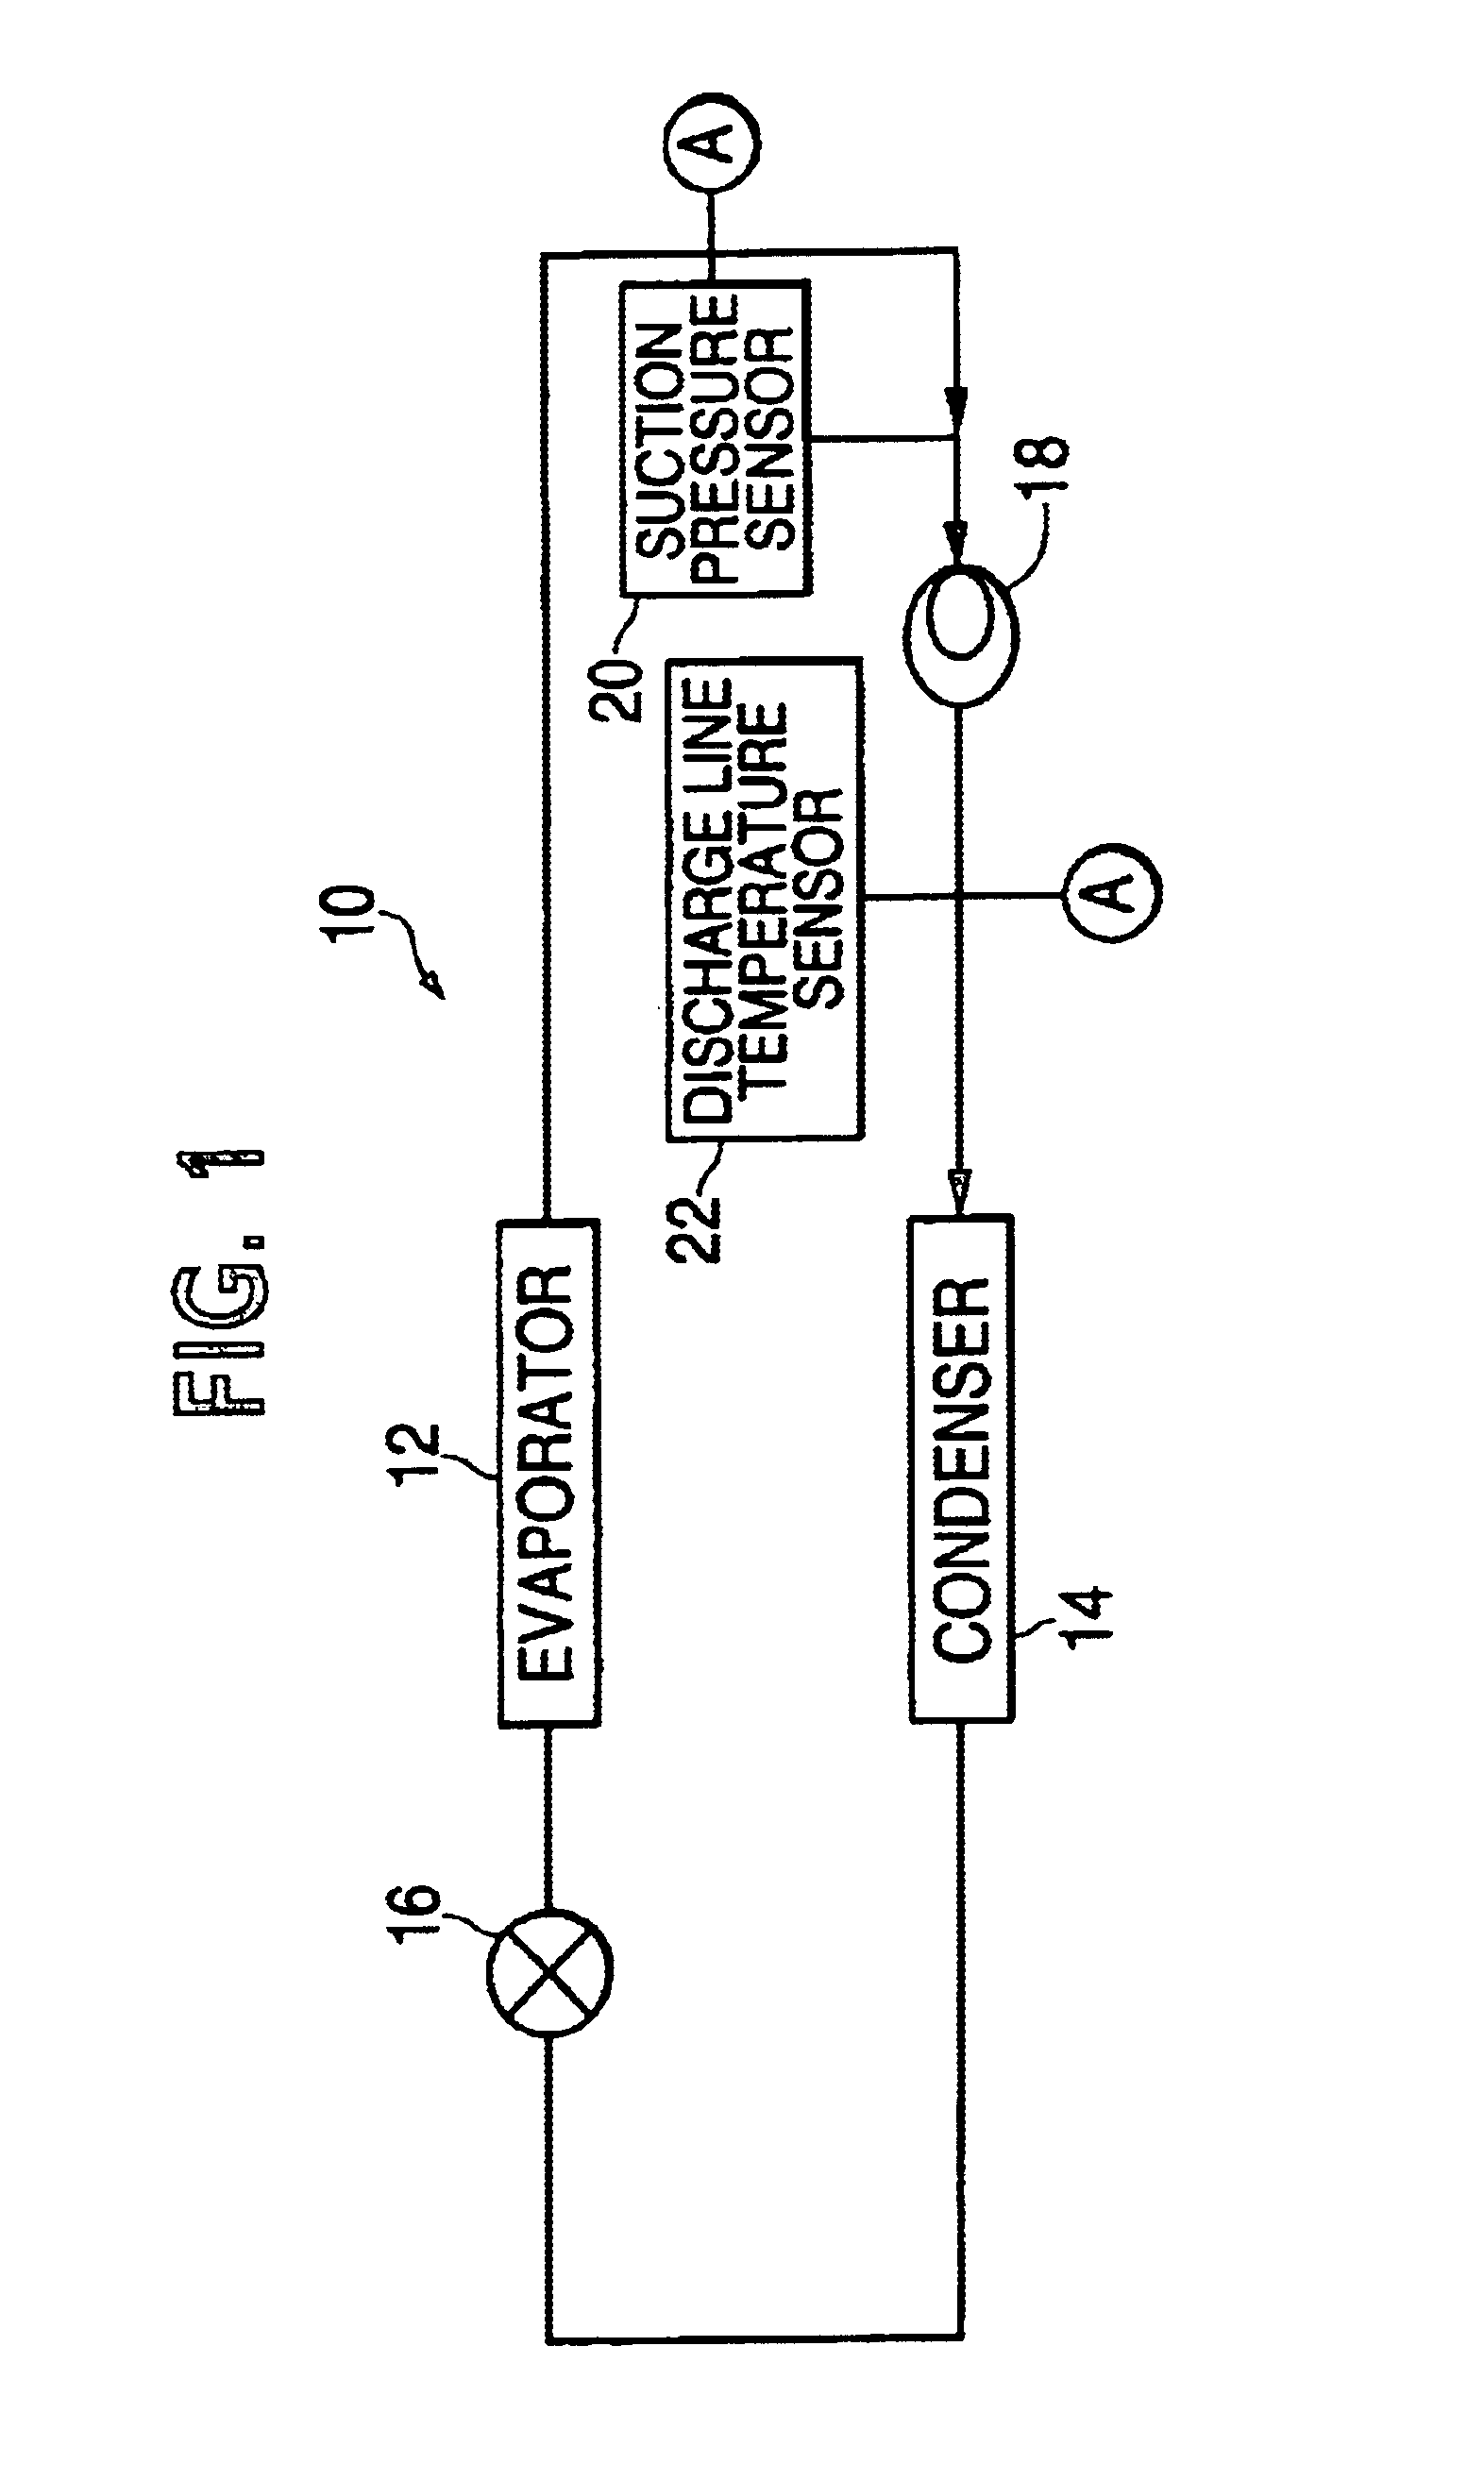 Device for prevention of backward operation of scroll compressors